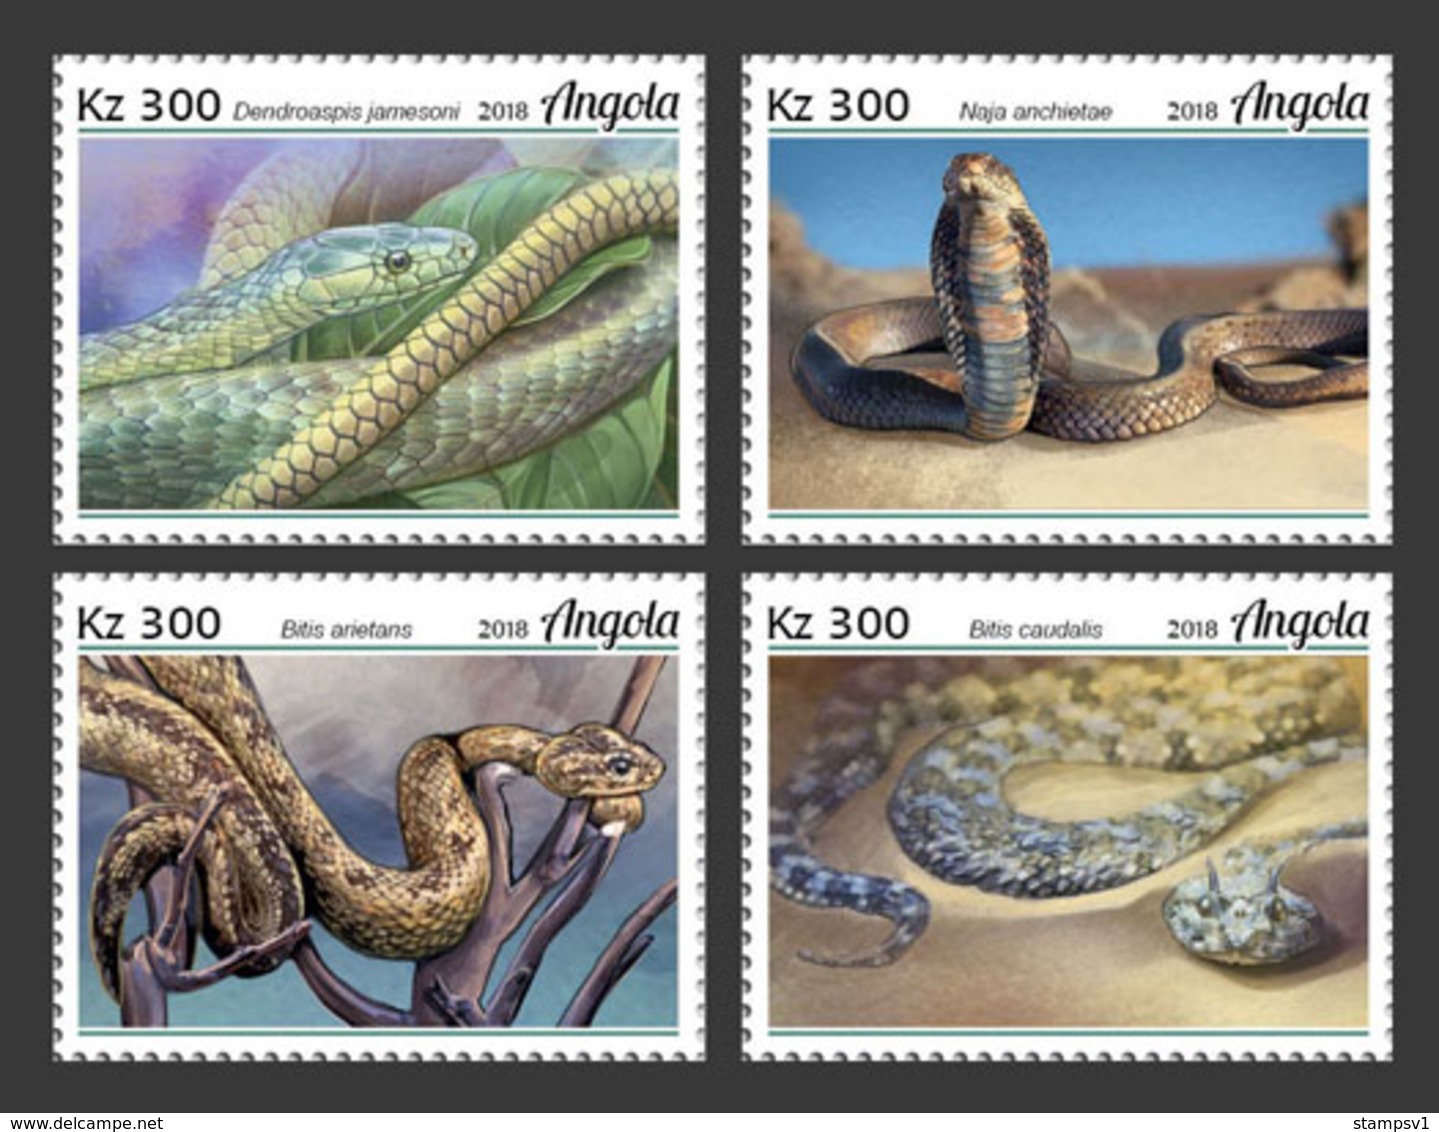 Angola. 2018 Snakes. (128a)   OFFICIAL ISSUE - Snakes